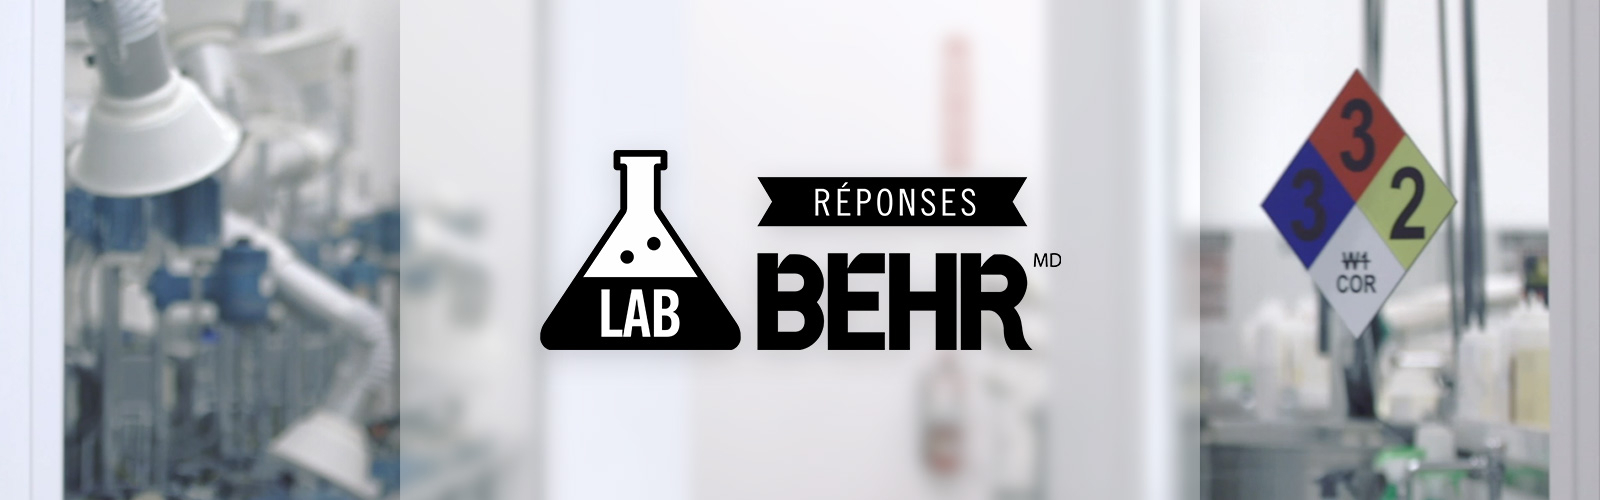 Desktop view of an image of a laboratory with a title BEHR LABS